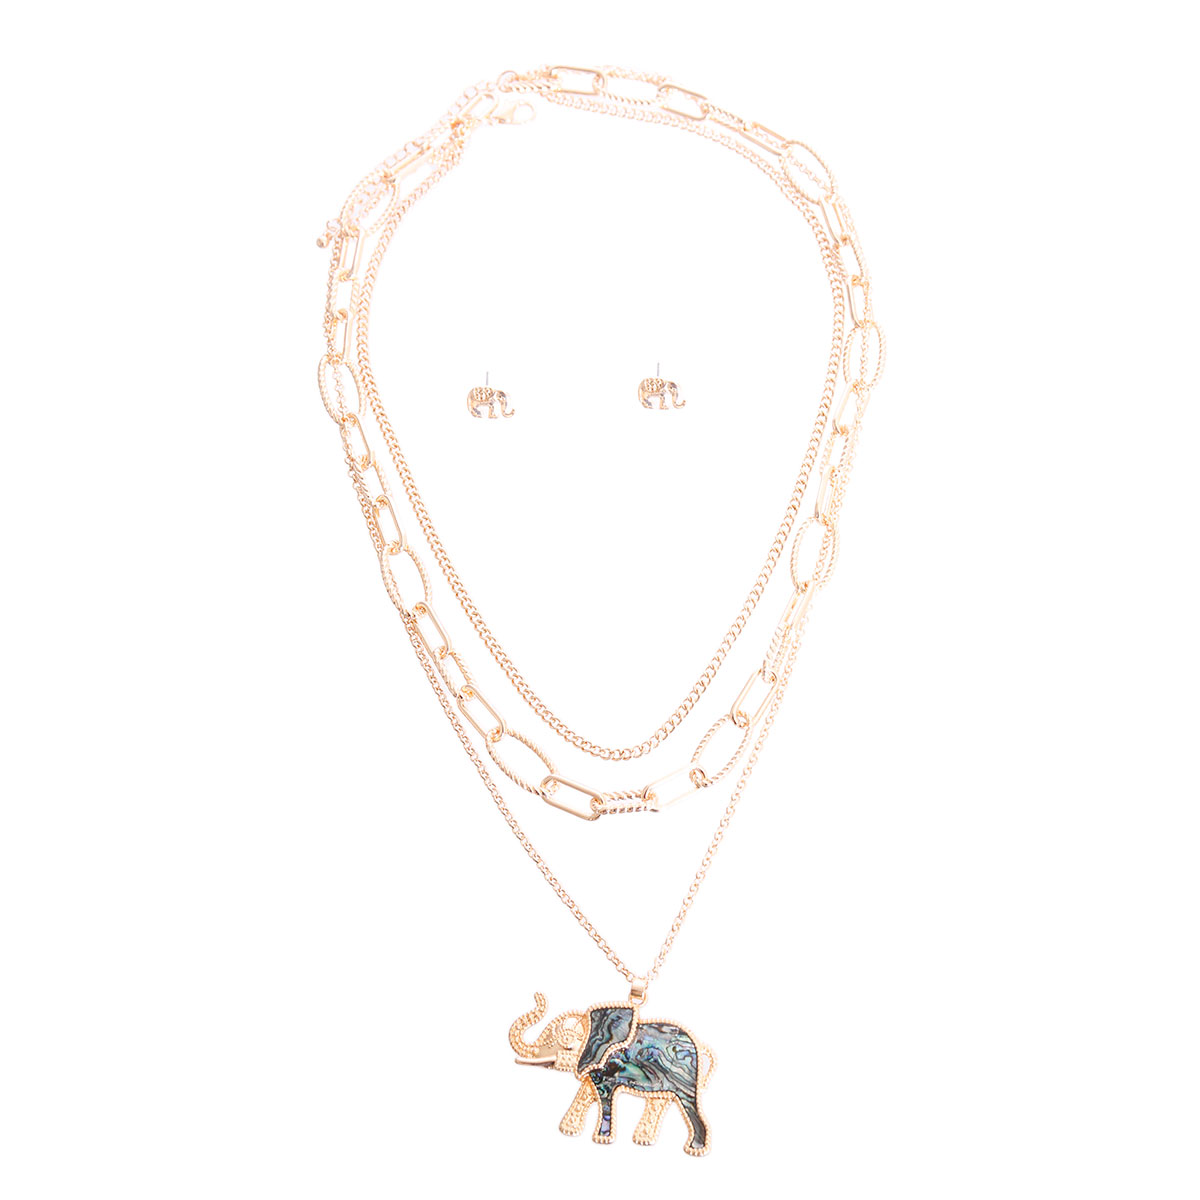 Abalone Elephant Gold Chain Necklace